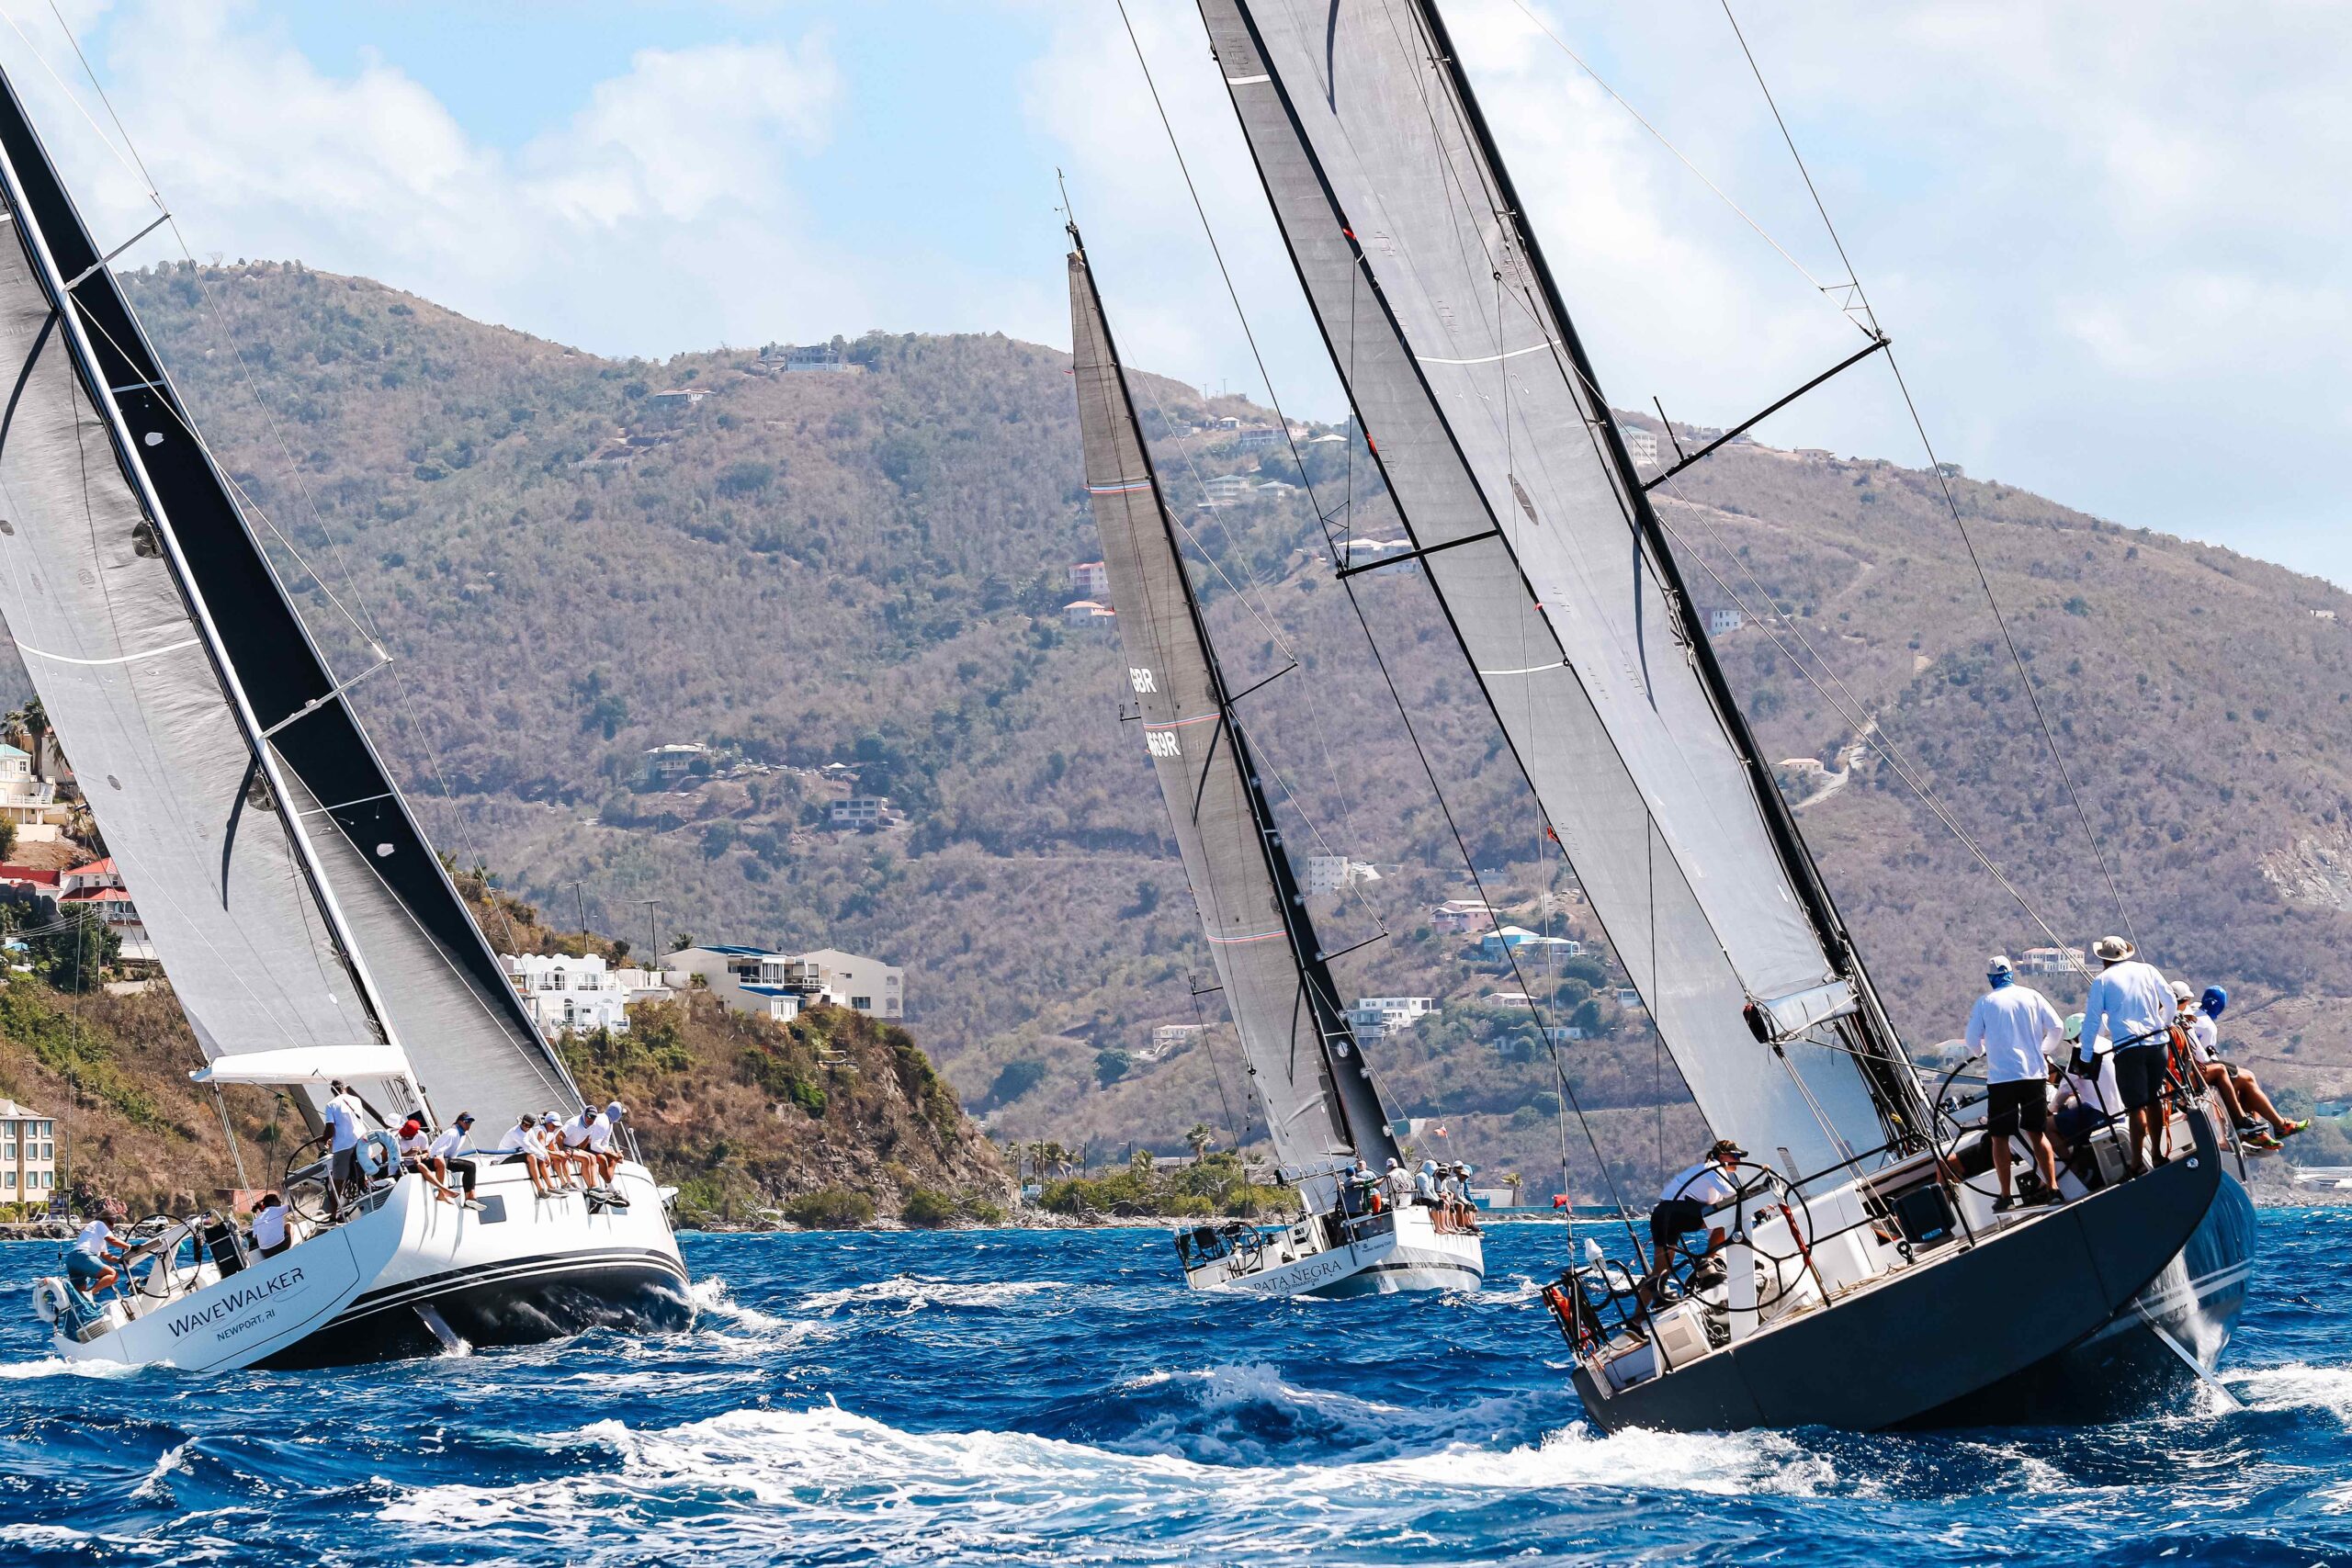 It’s a Wrap! The 50th Anniversary of the BVI Spring Regatta and Sailing